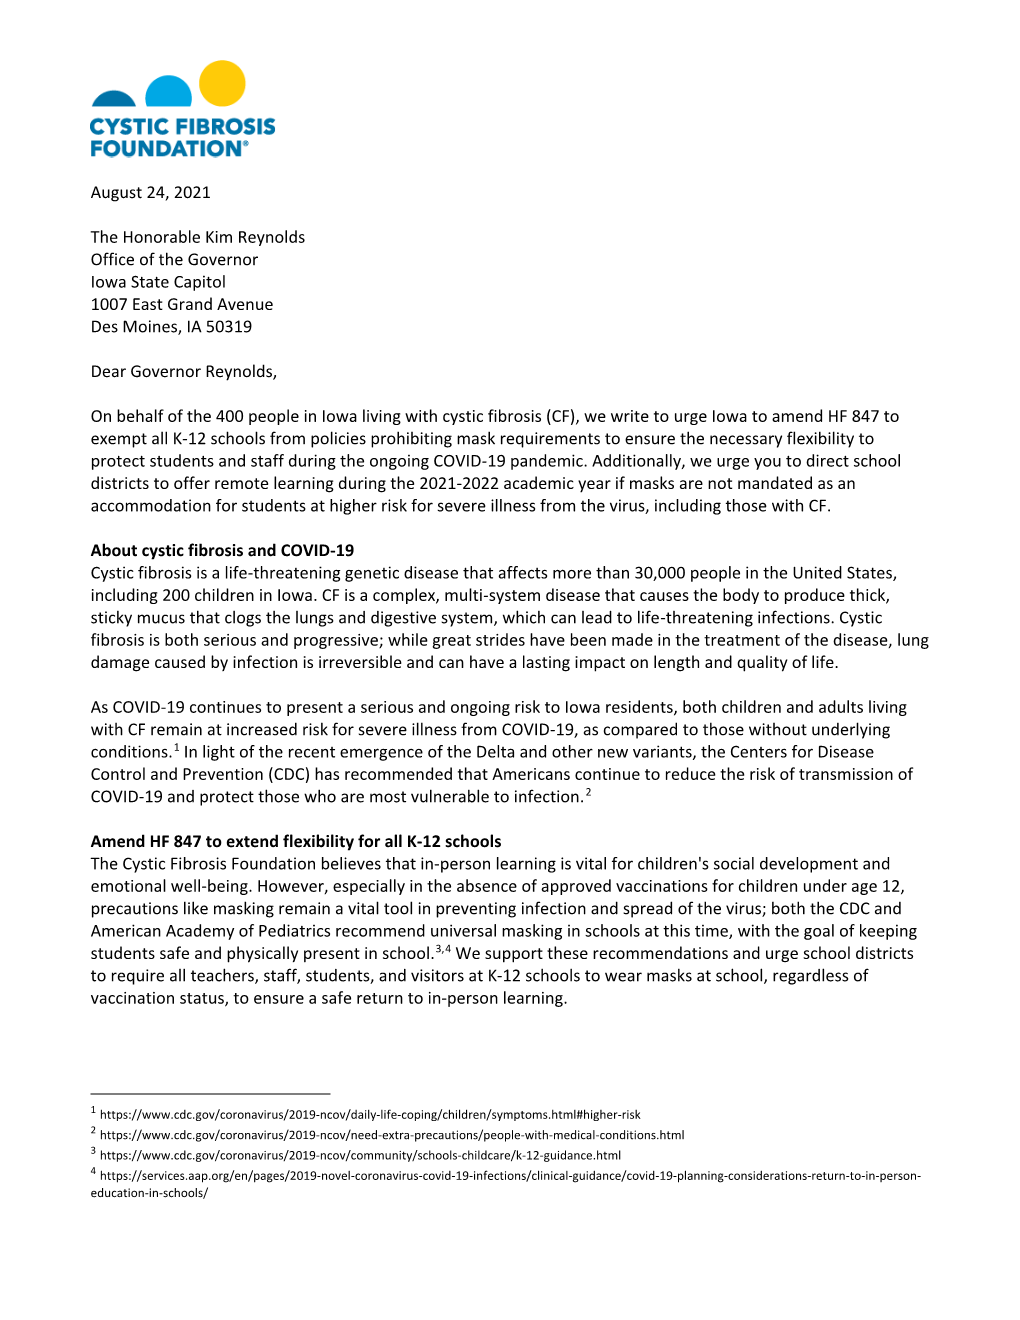 CF Foundation Letter to Iowa Governor on Masks in Schools